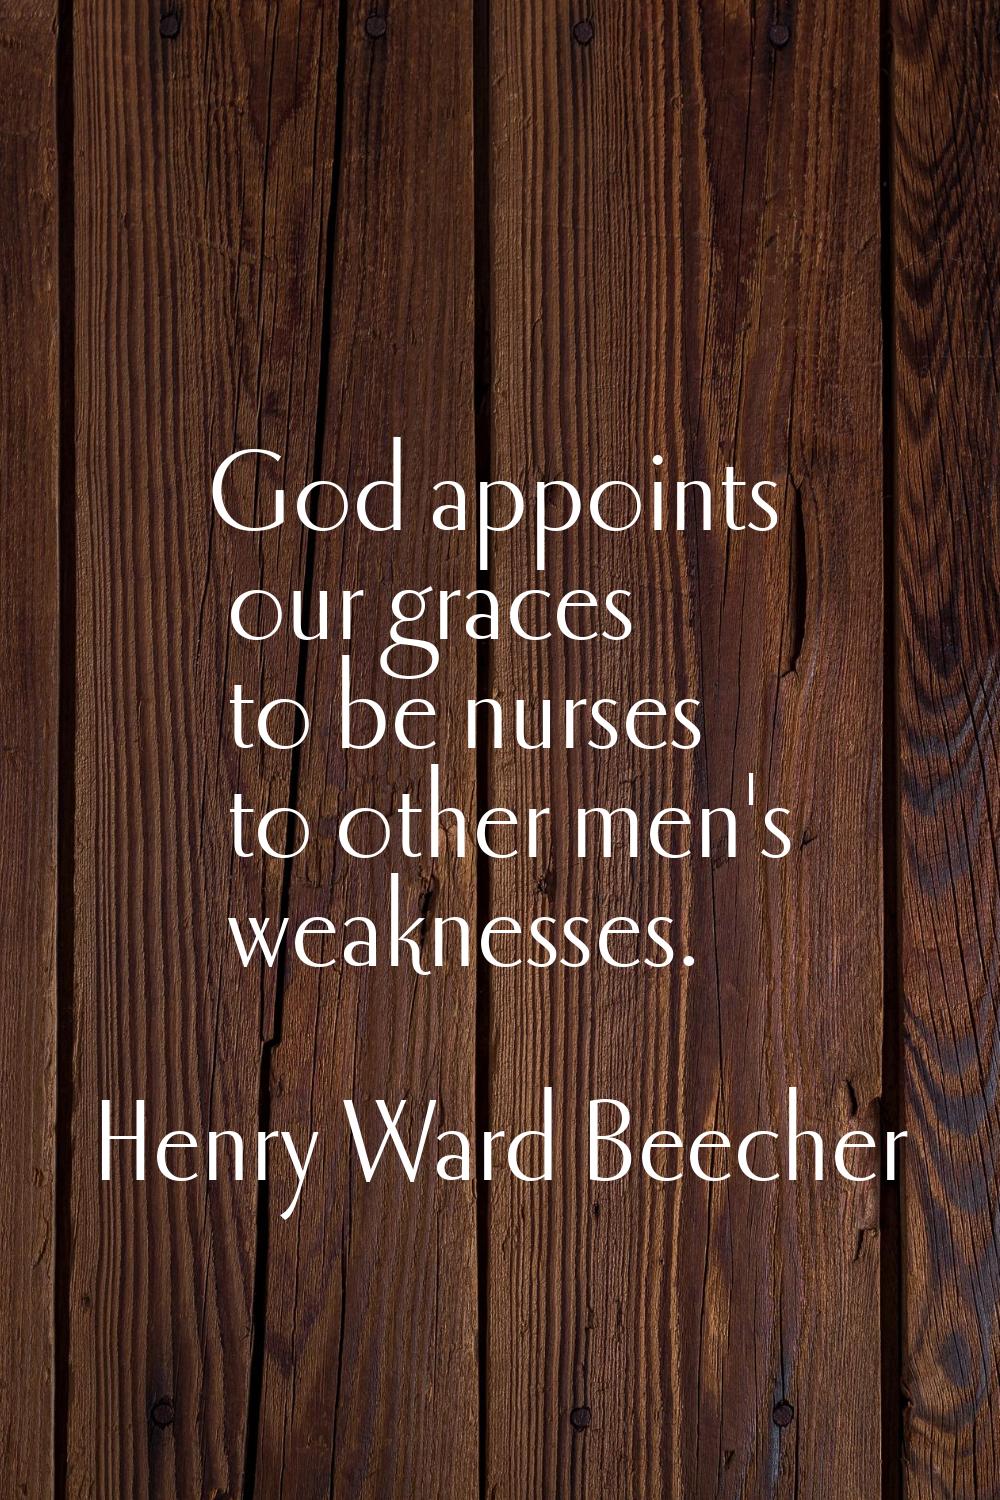 God appoints our graces to be nurses to other men's weaknesses.